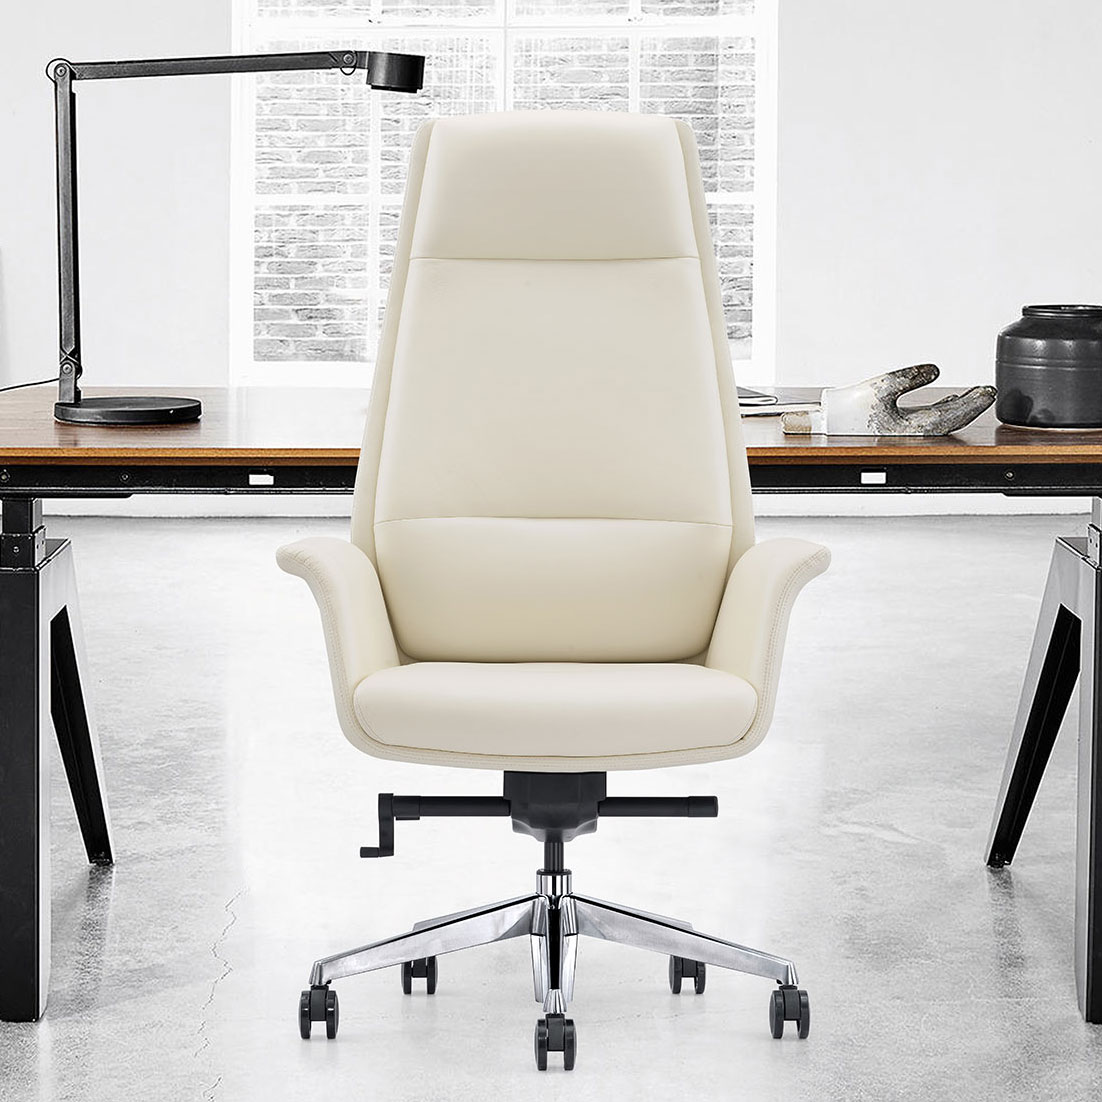 Off-White Leather High-Back Executive Office Chair